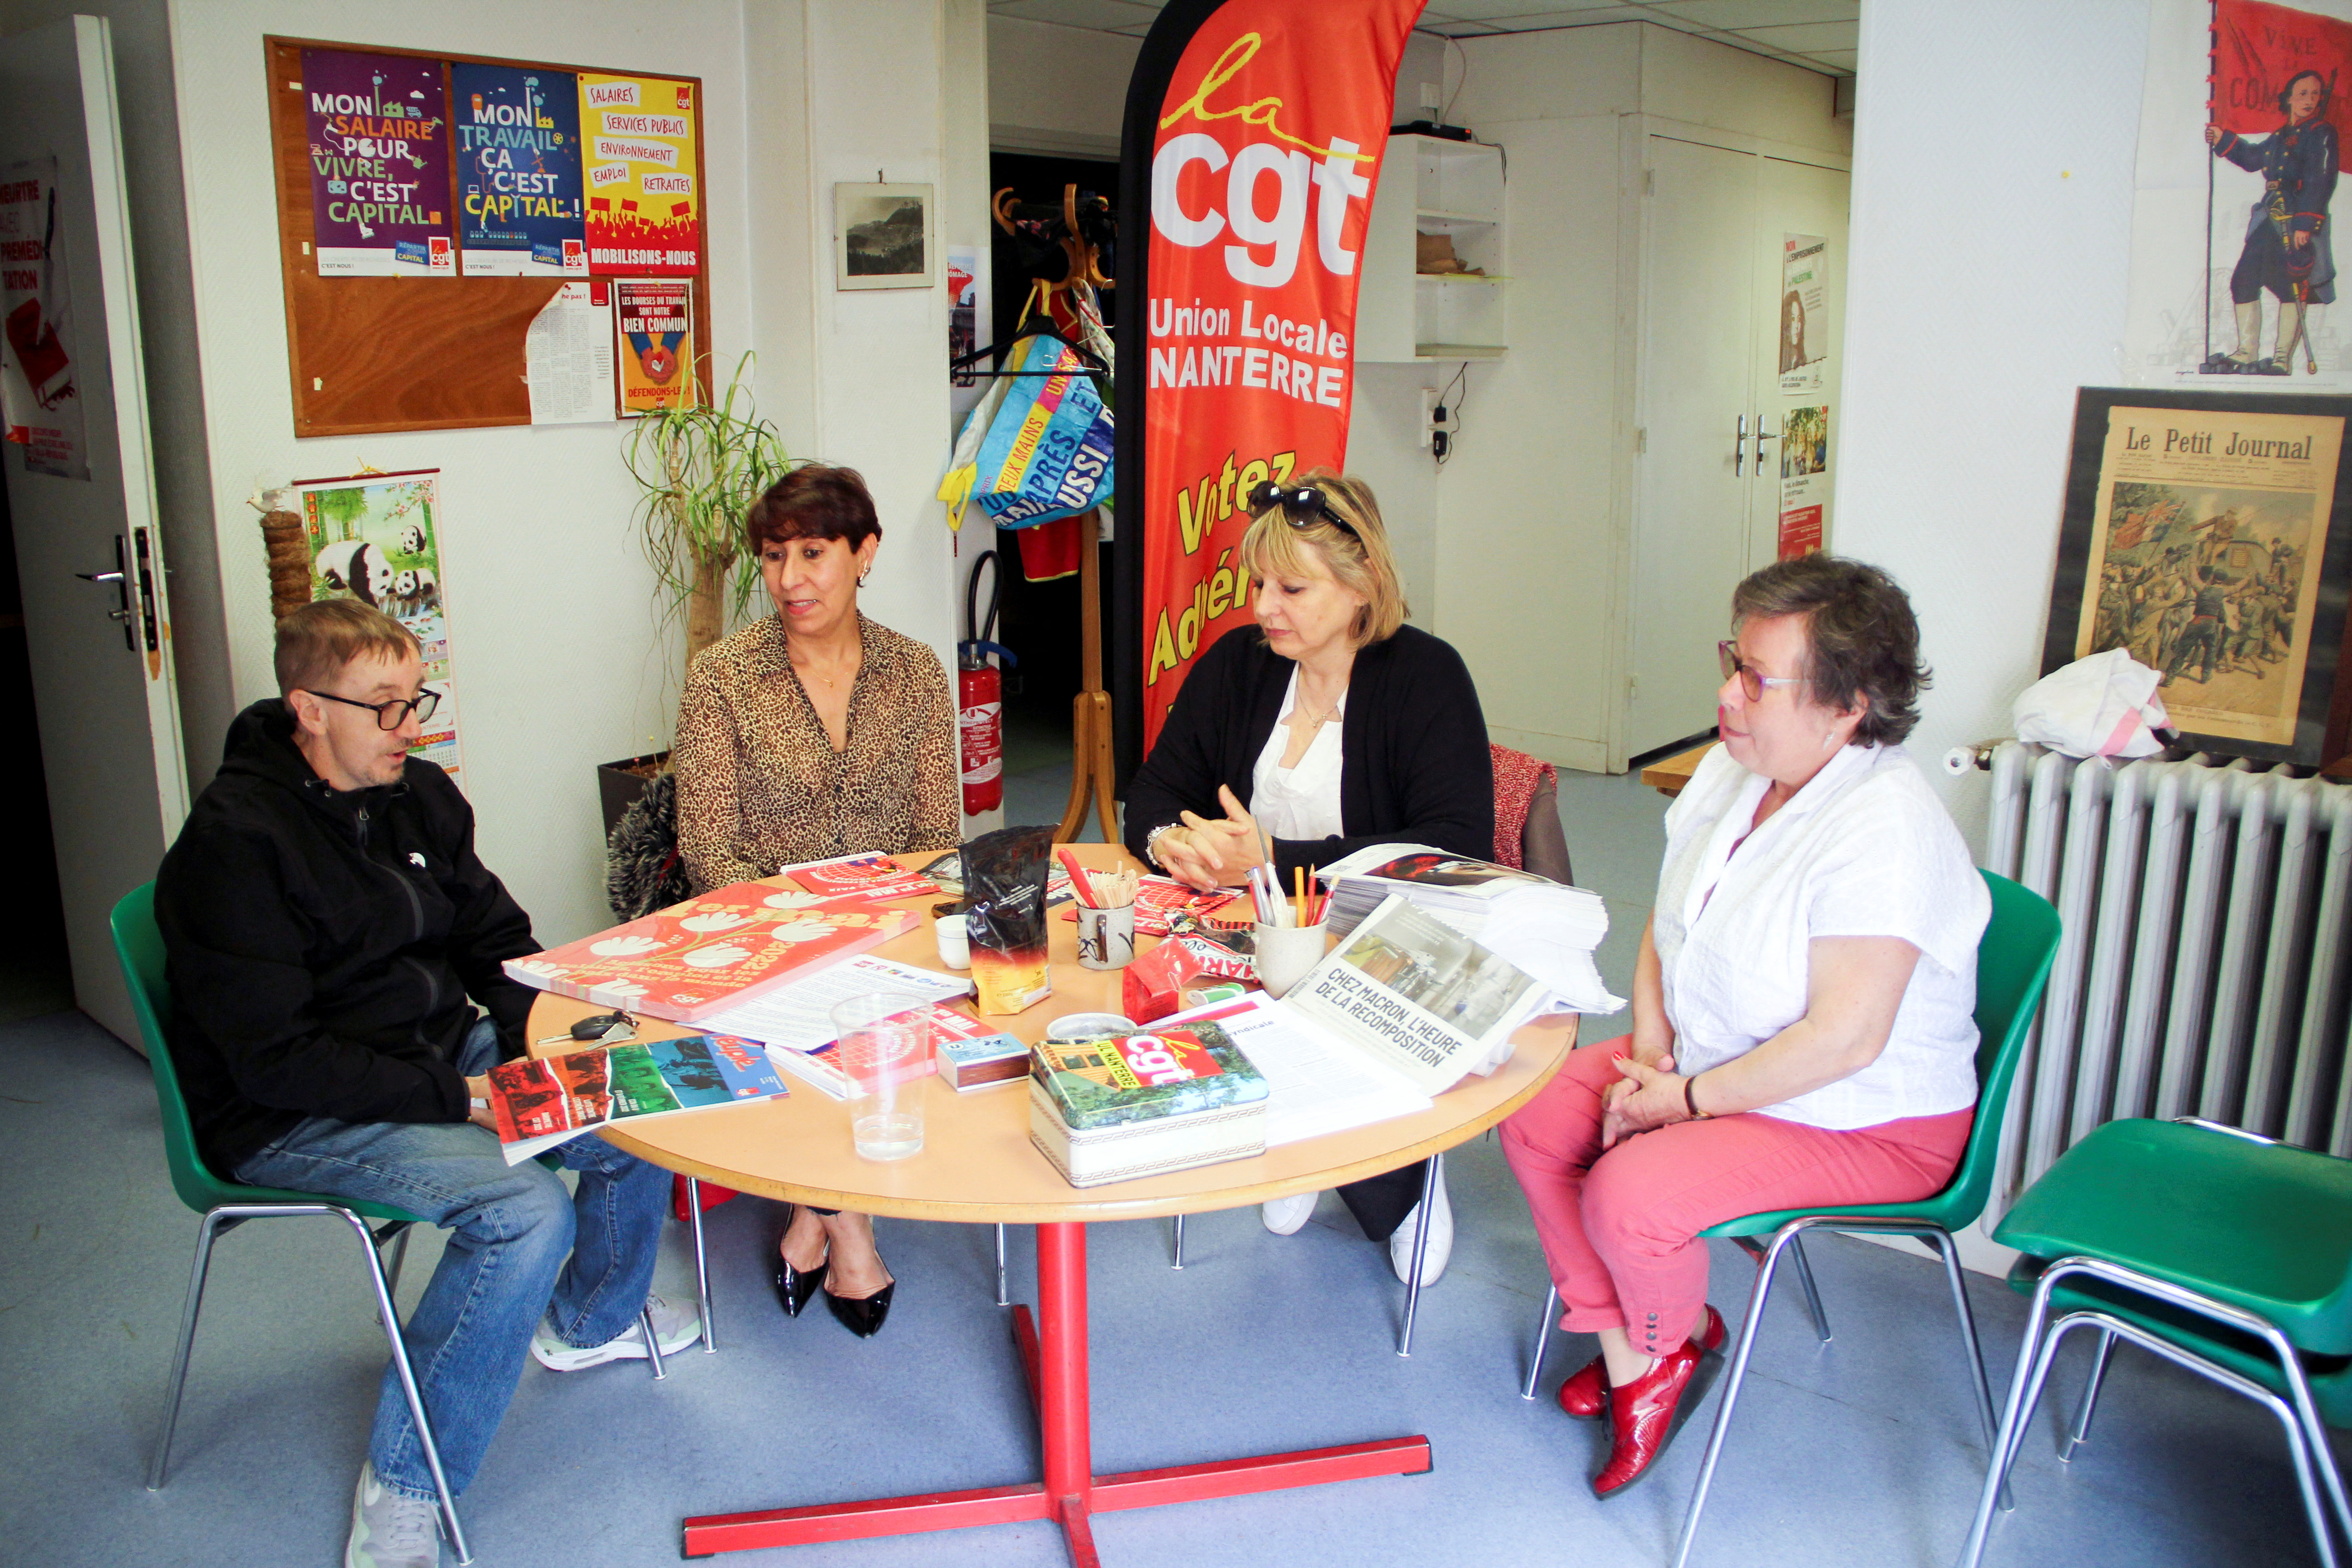 French CGT labour union members prepare the Labour Day protest at their local office in Nanterre